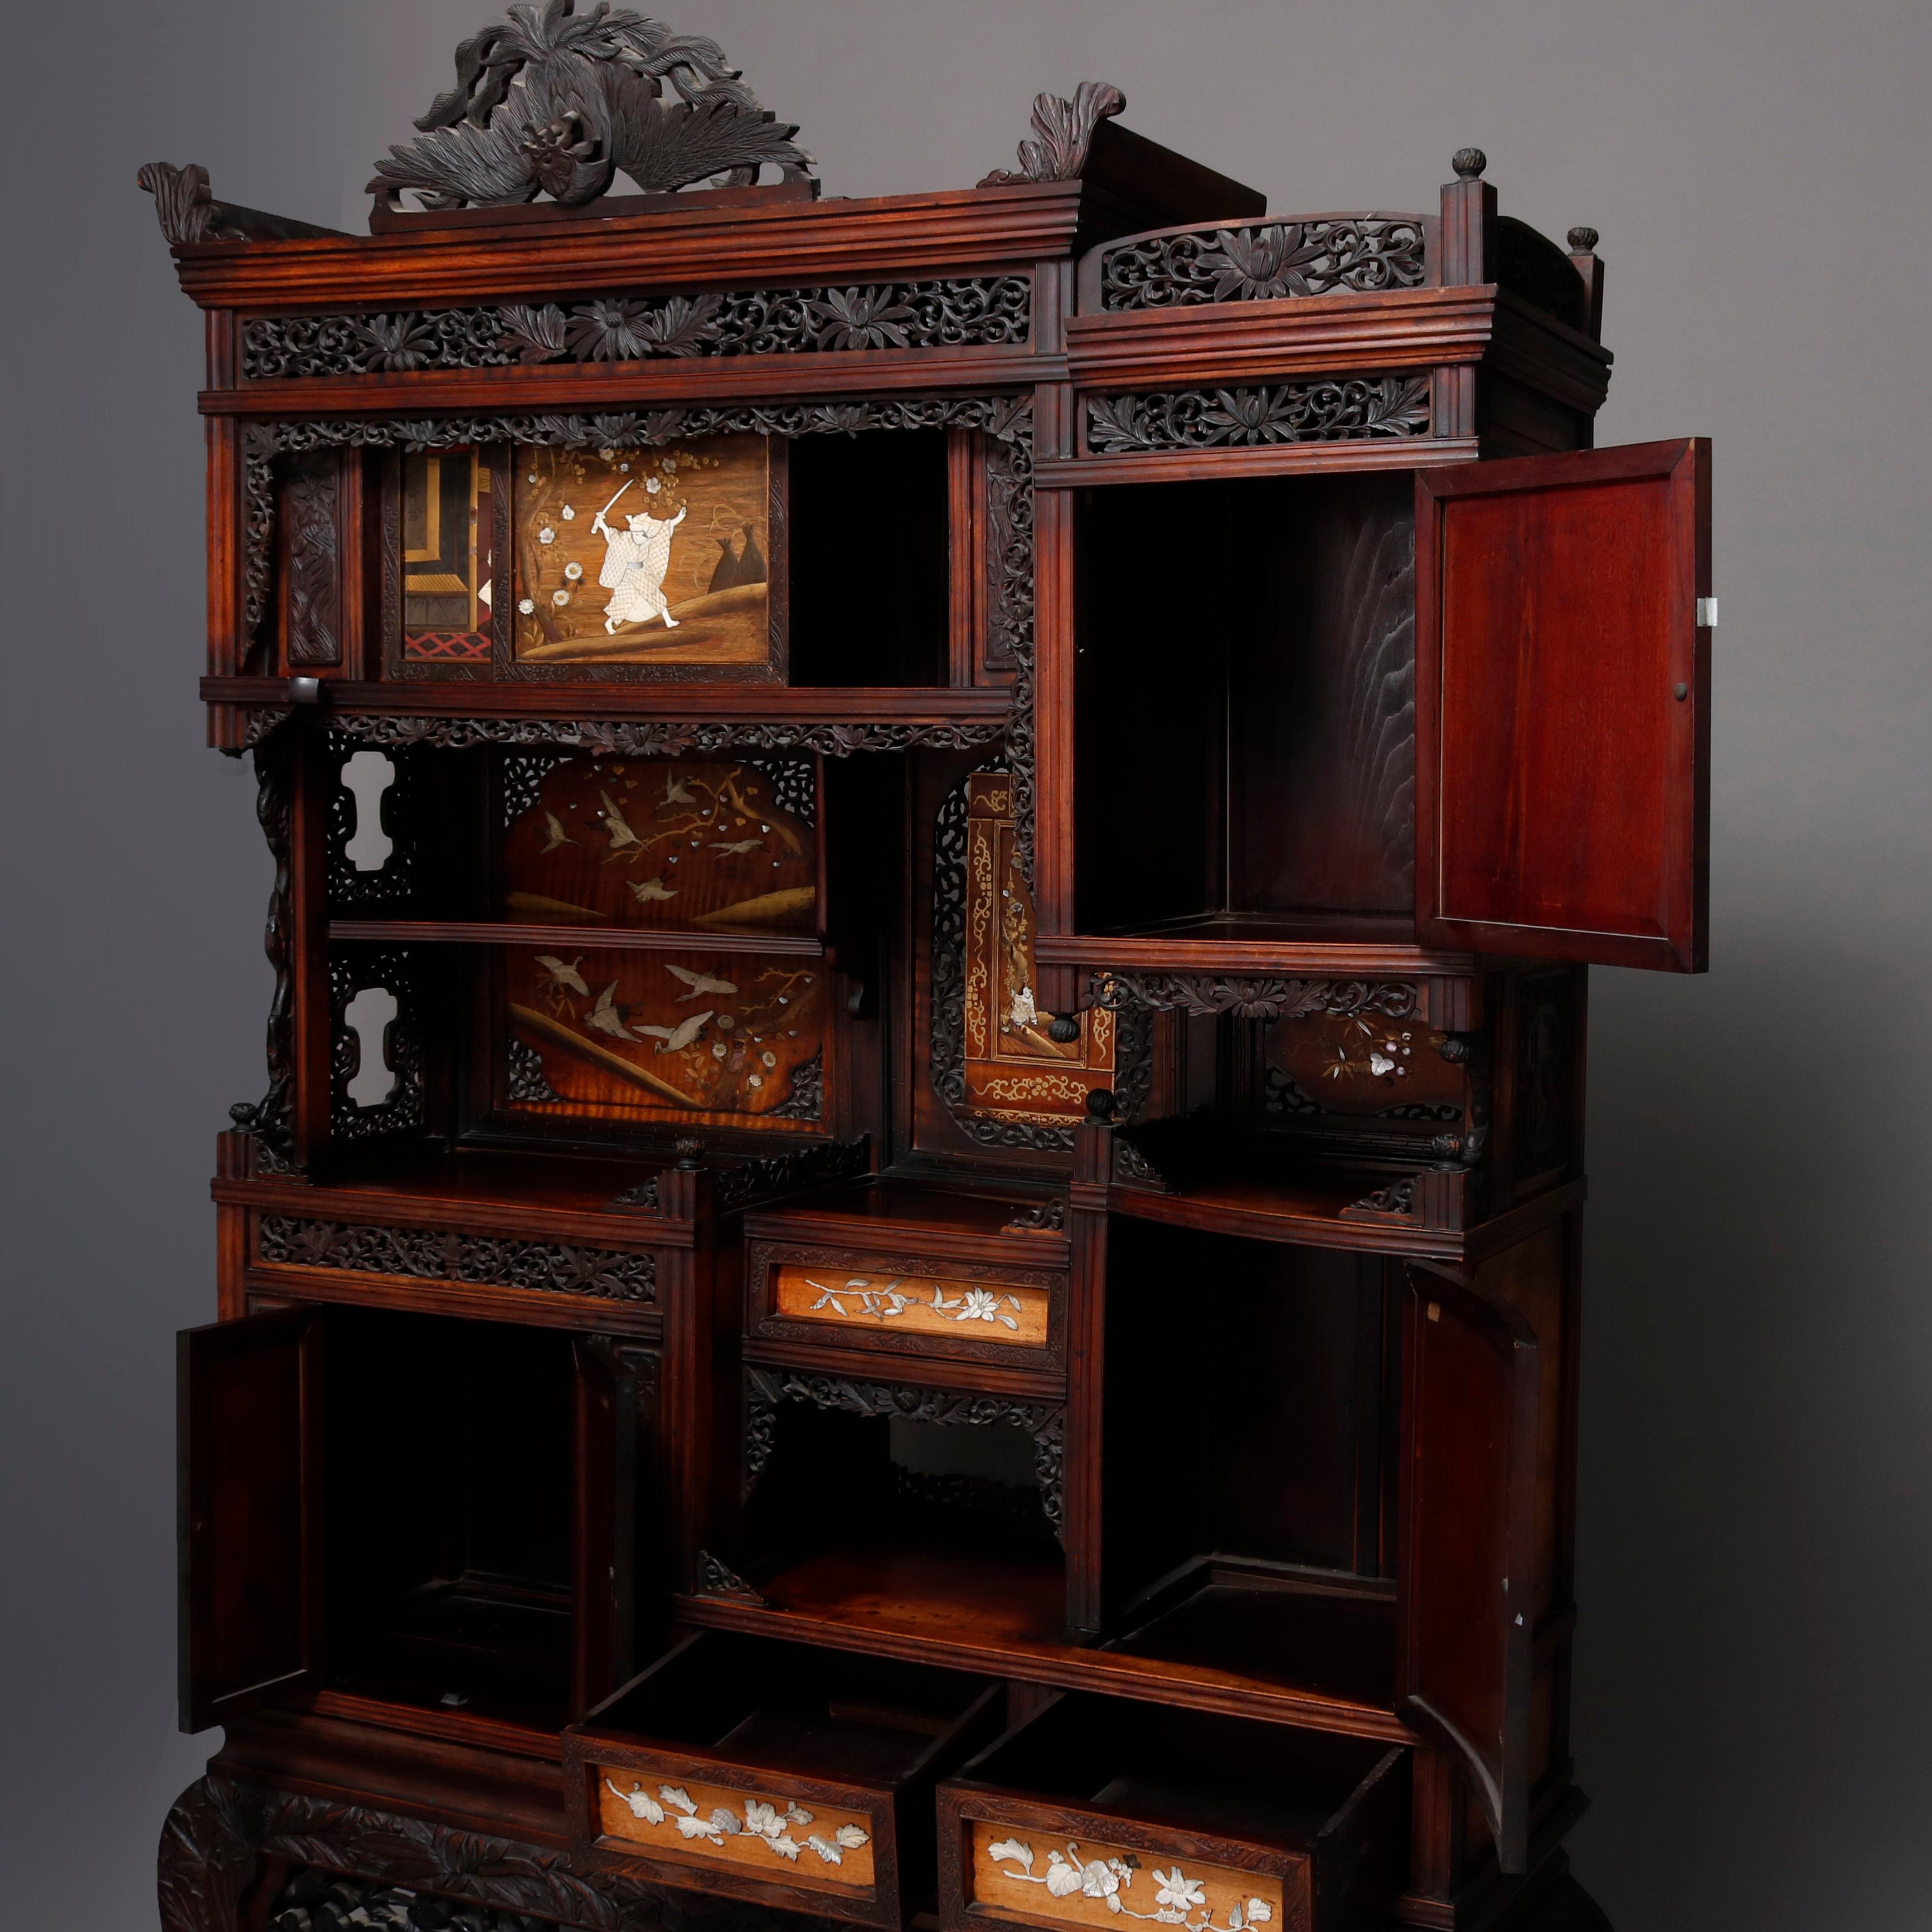 20th Century Antique Japanese Figural Carved Mixed Wood & Hardstone Inlaid Cabinet circa 1900